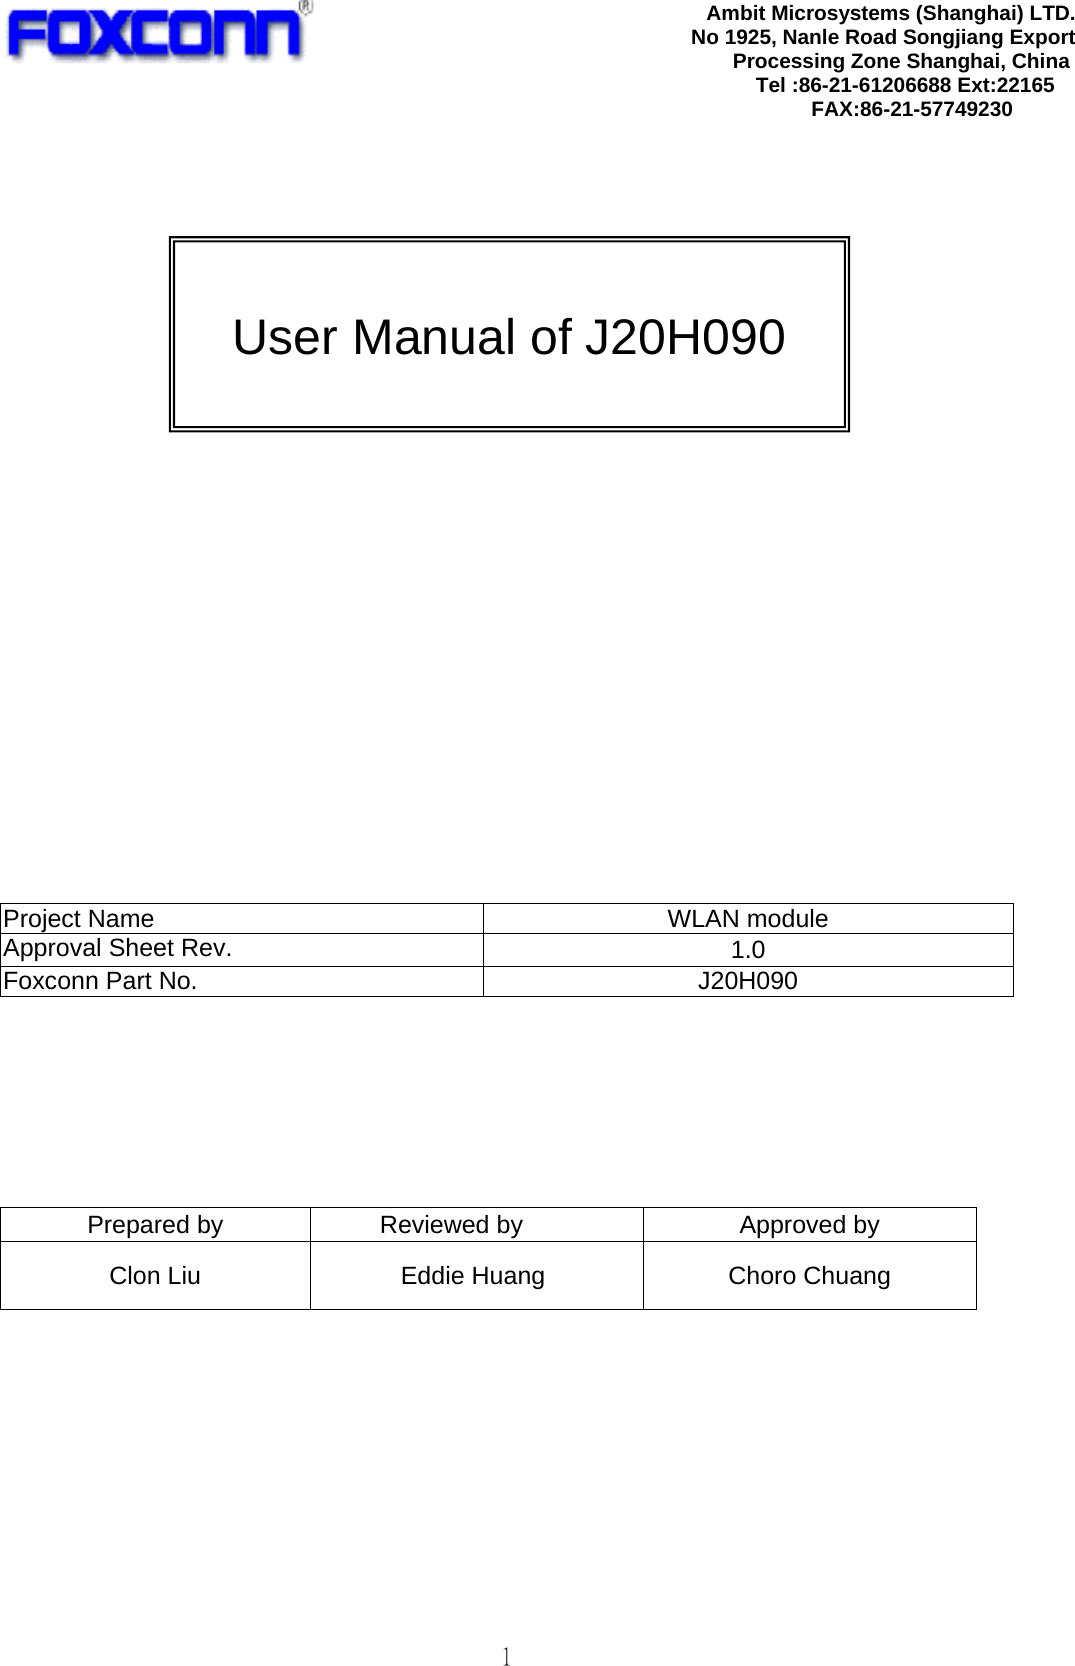   1                           Project Name  WLAN module Approval Sheet Rev.  1.0 Foxconn Part No.  J20H090        Prepared by  Reviewed by  Approved by Clon Liu  Eddie Huang  Choro Chuang        Ambit Microsystems (Shanghai) LTD.No 1925, Nanle Road Songjiang Export Processing Zone Shanghai, China Tel :86-21-61206688 Ext:22165 FAX:86-21-57749230  User Manual of J20H090 